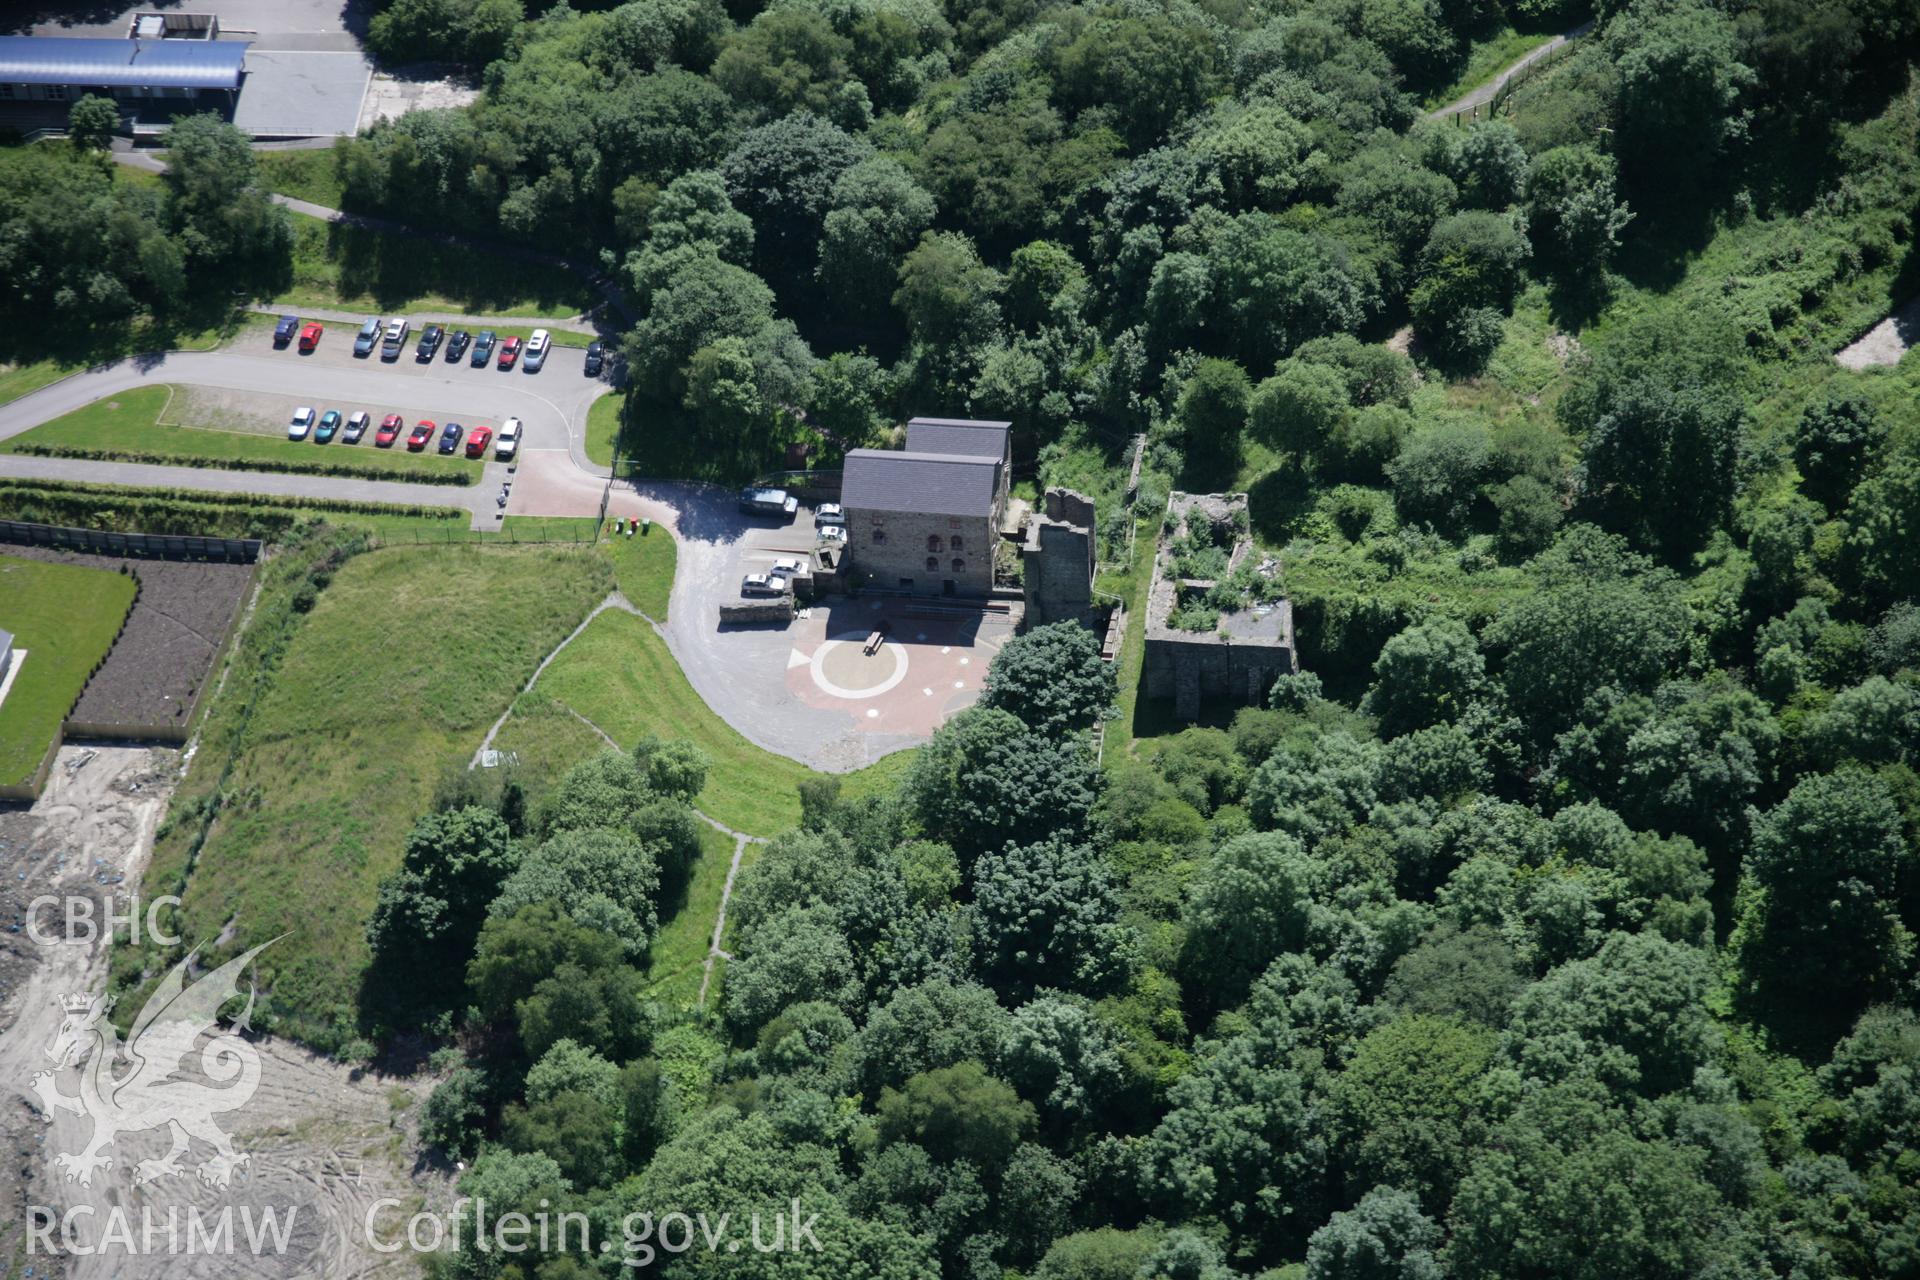 RCAHMW colour oblique aerial photograph of Tondu Ironworks. Taken on 22 June 2005 by Toby Driver